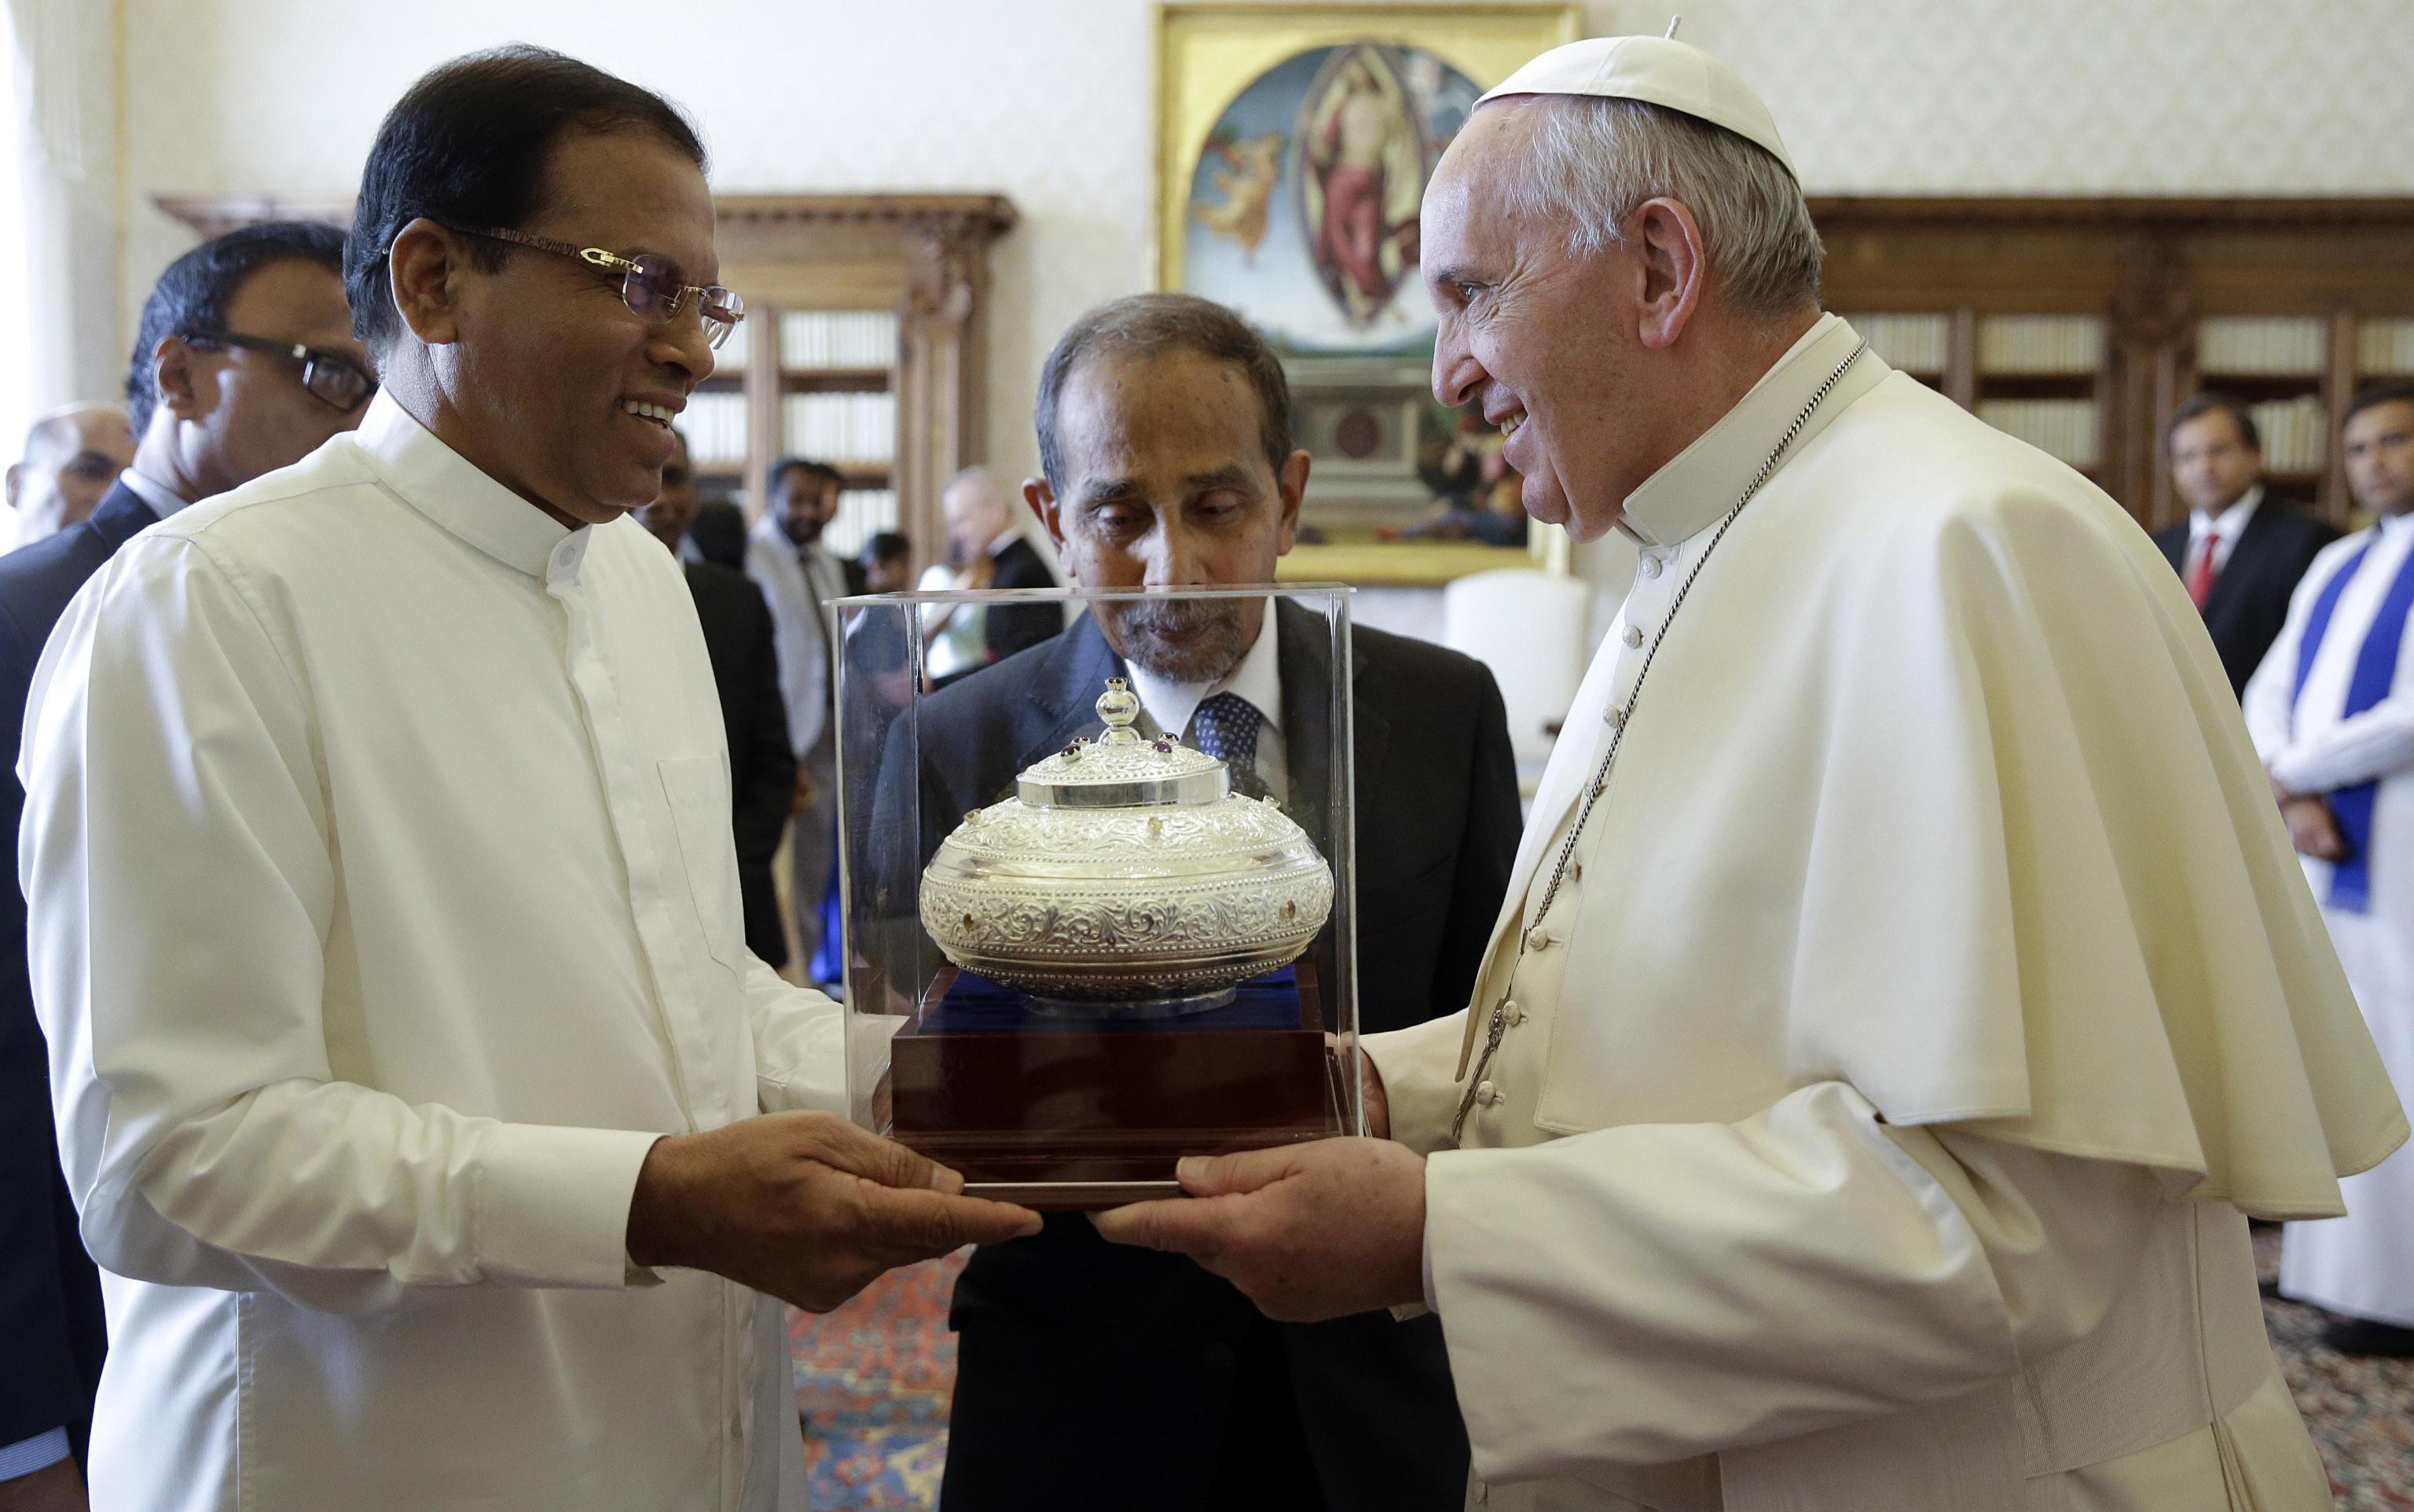 Pope Francis meets with Sri Lankan President Maithripala Sirisena during a private audience at the Vatican